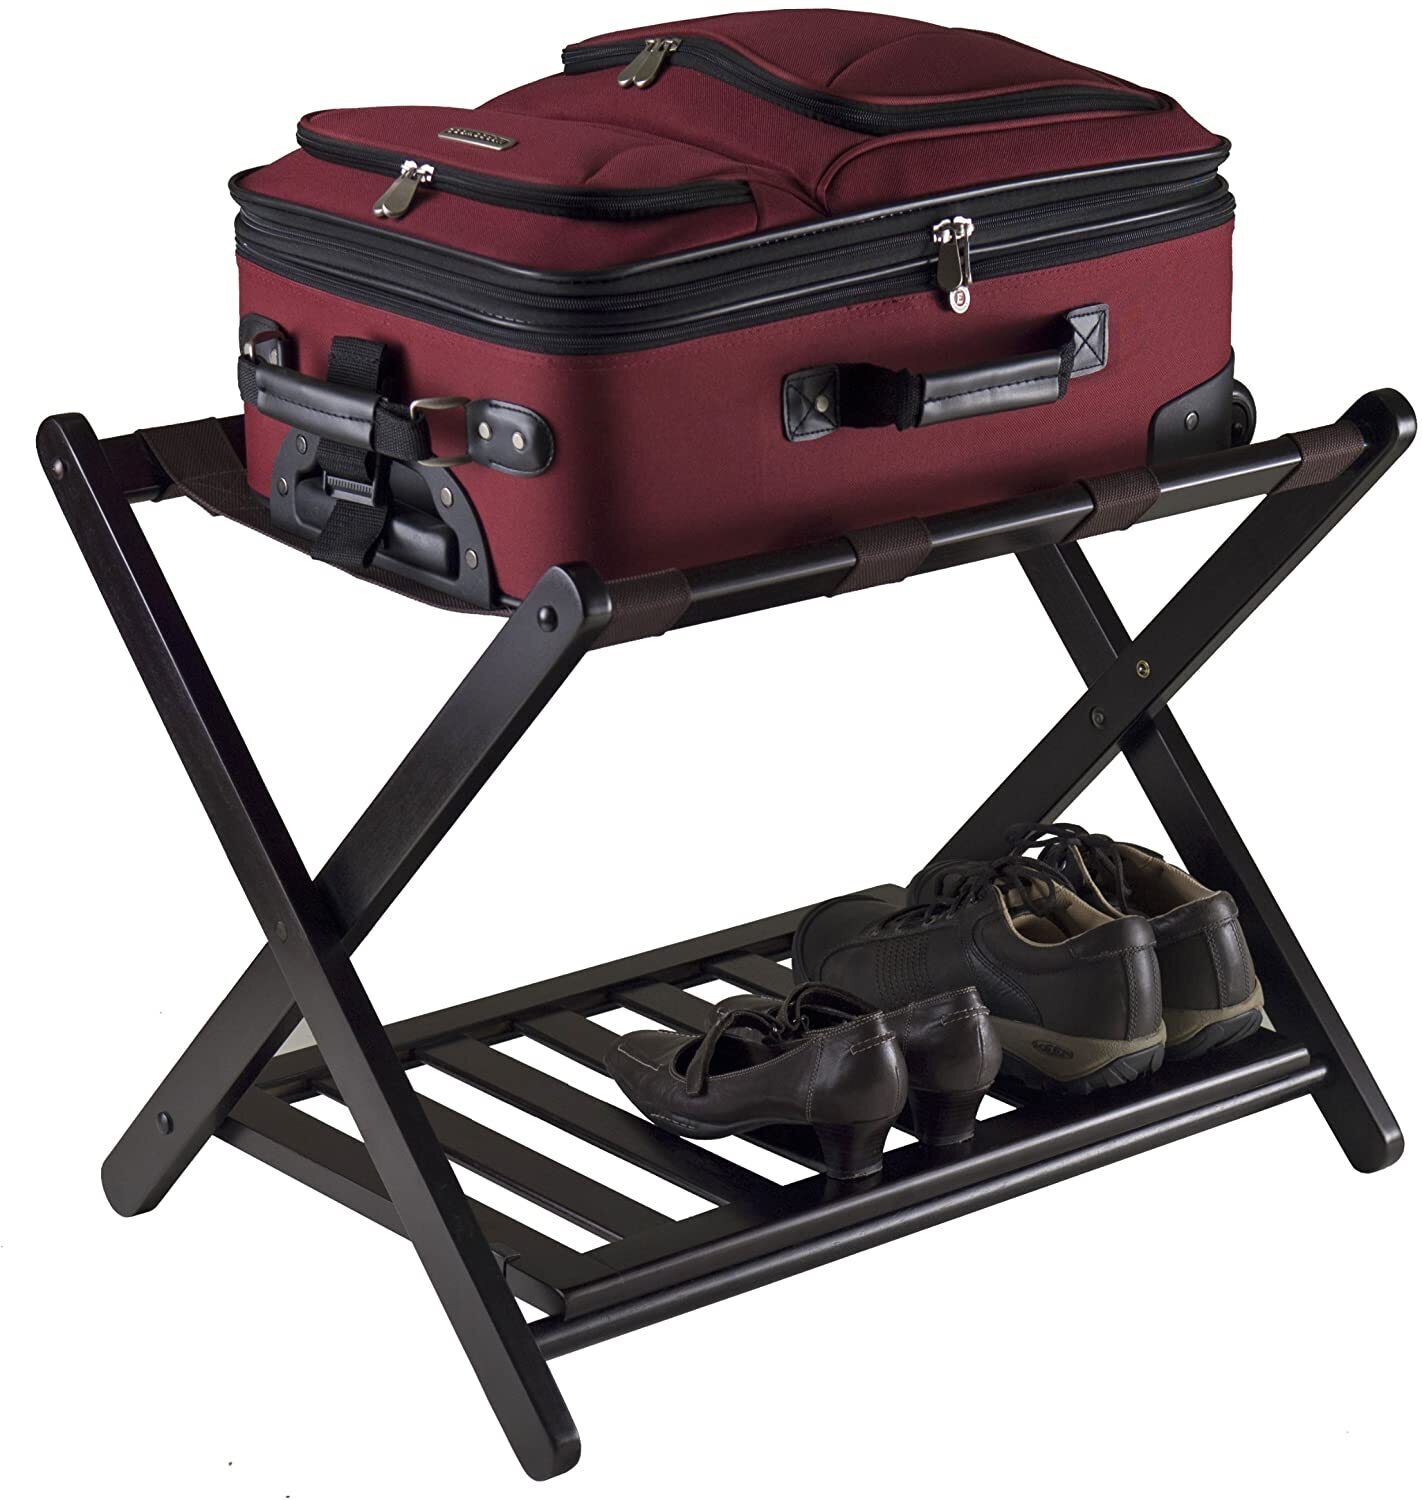 Luggage Rack for Small Spaces